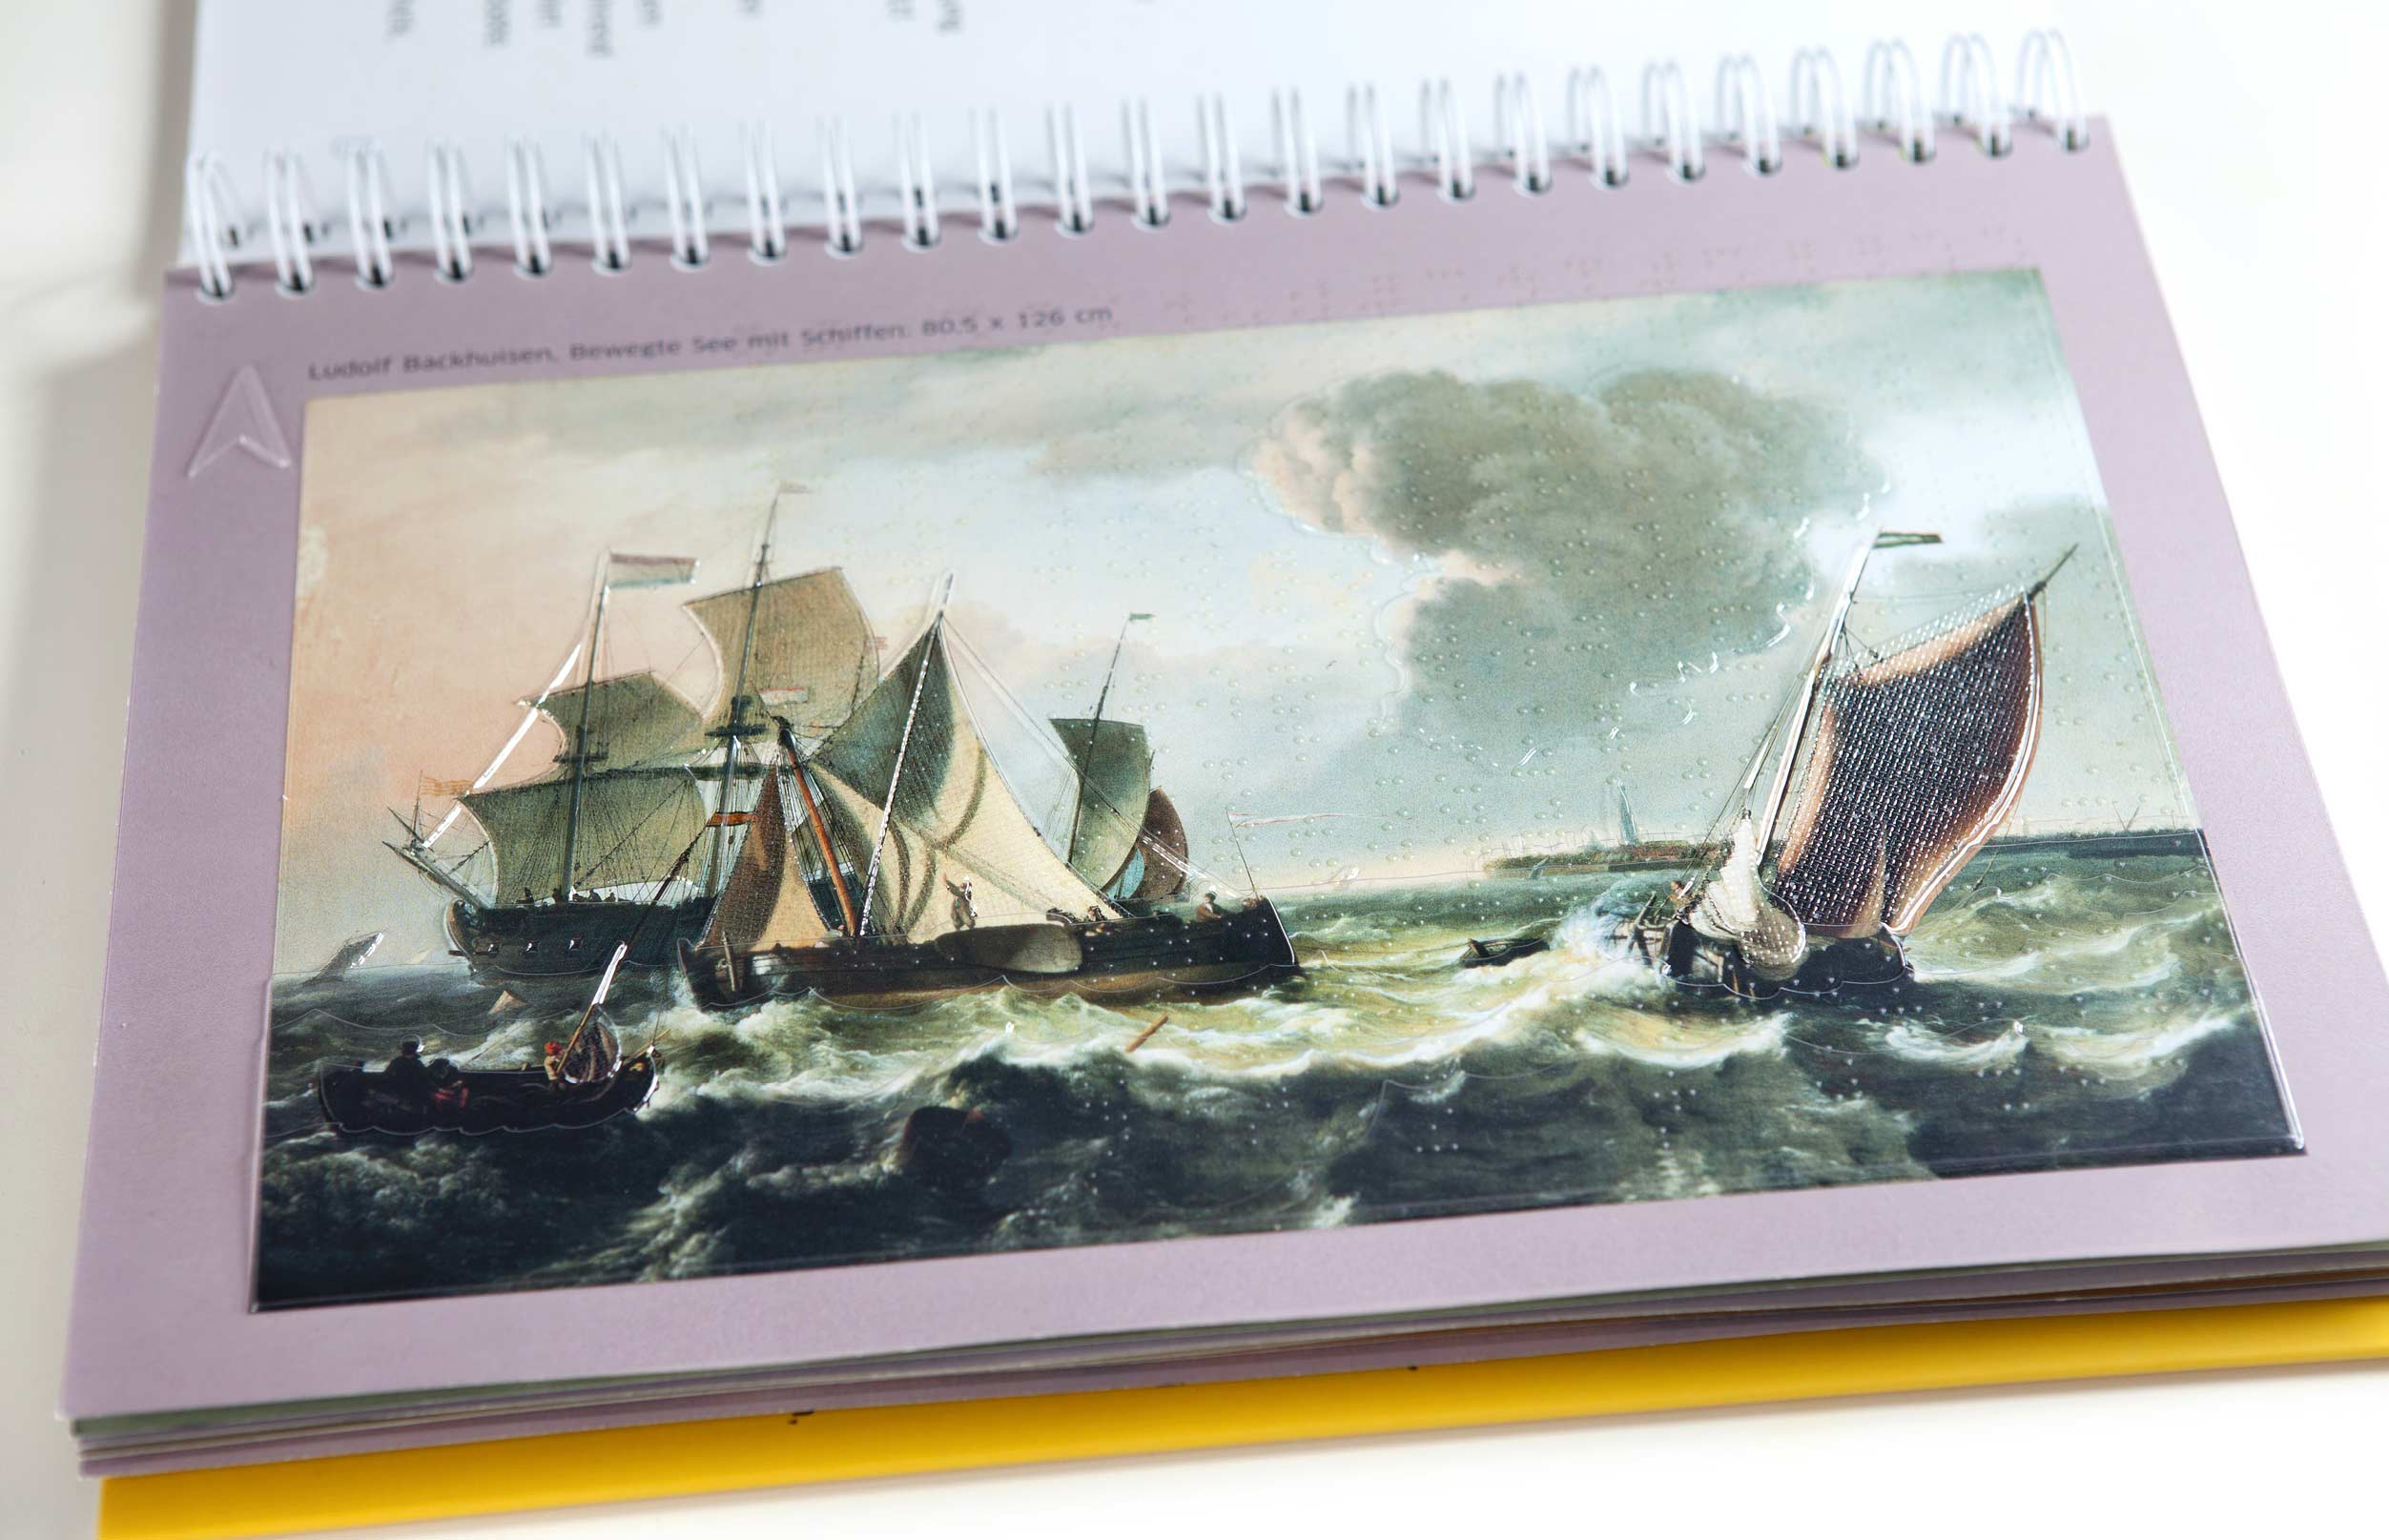 A view of the page with the painting Moving Sea with Ships by Ludolf Backhuyzen.